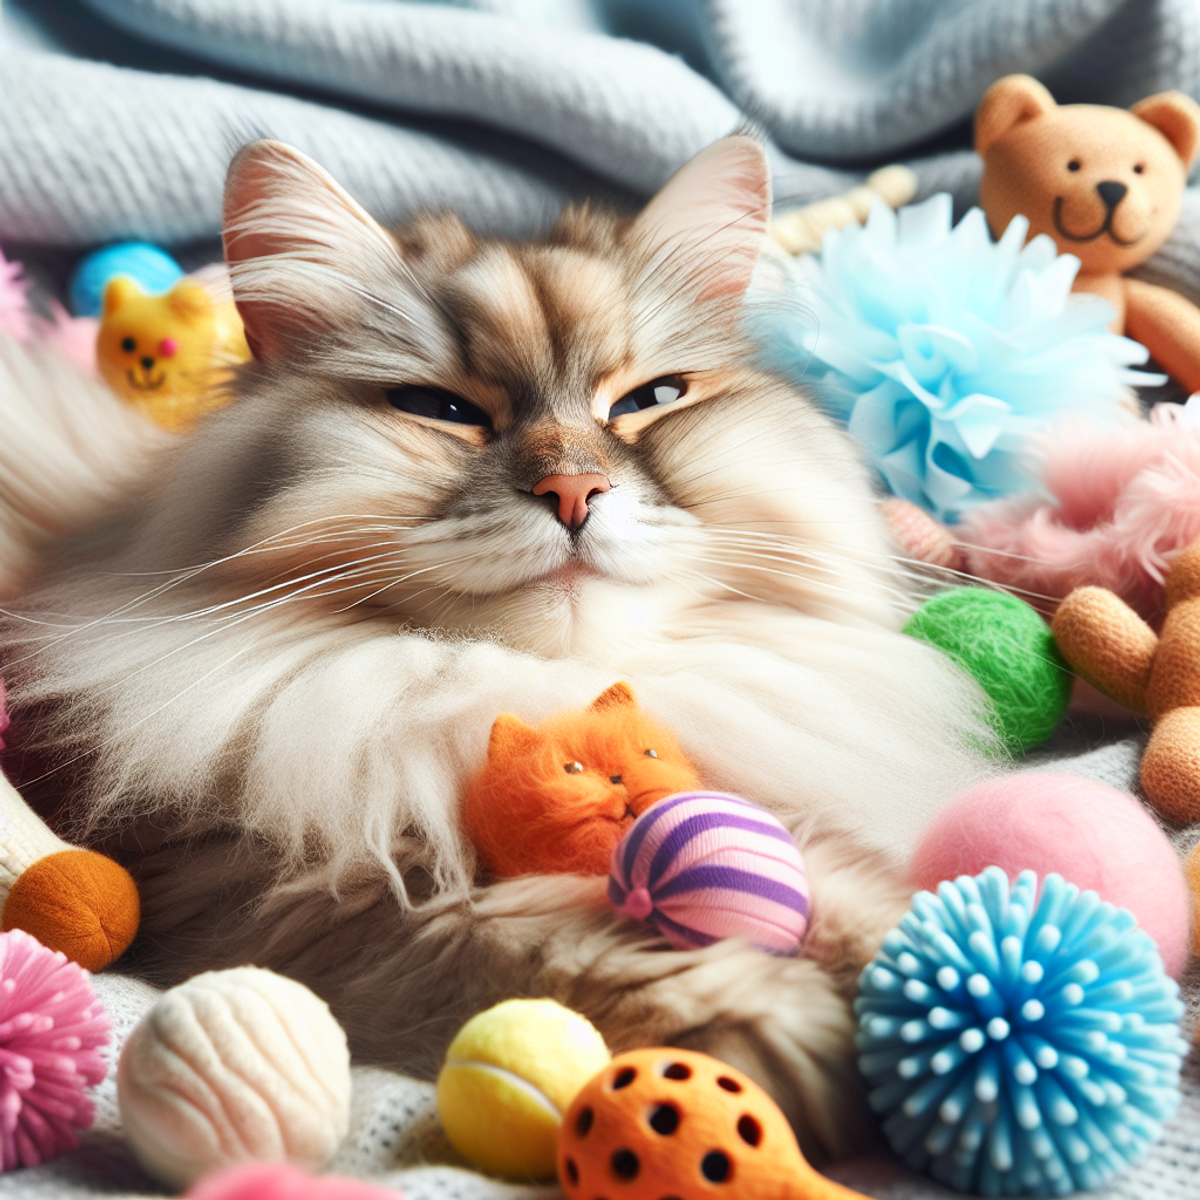 A senior cat surrounded by colorful, soft toys, looking content and relaxed.